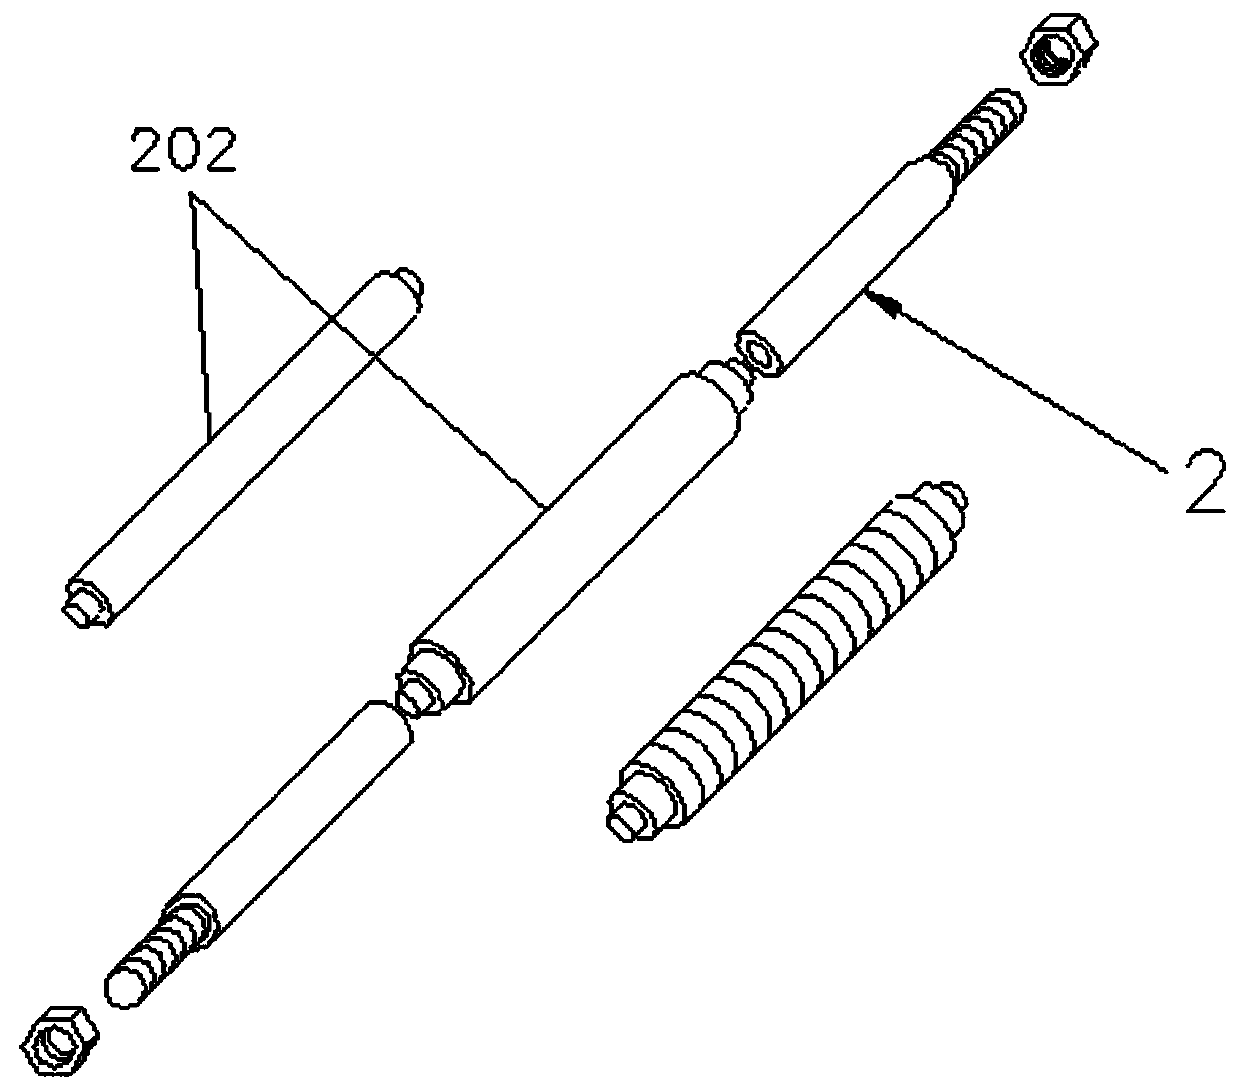 Combined elastic external fixation bracket for limb fracture